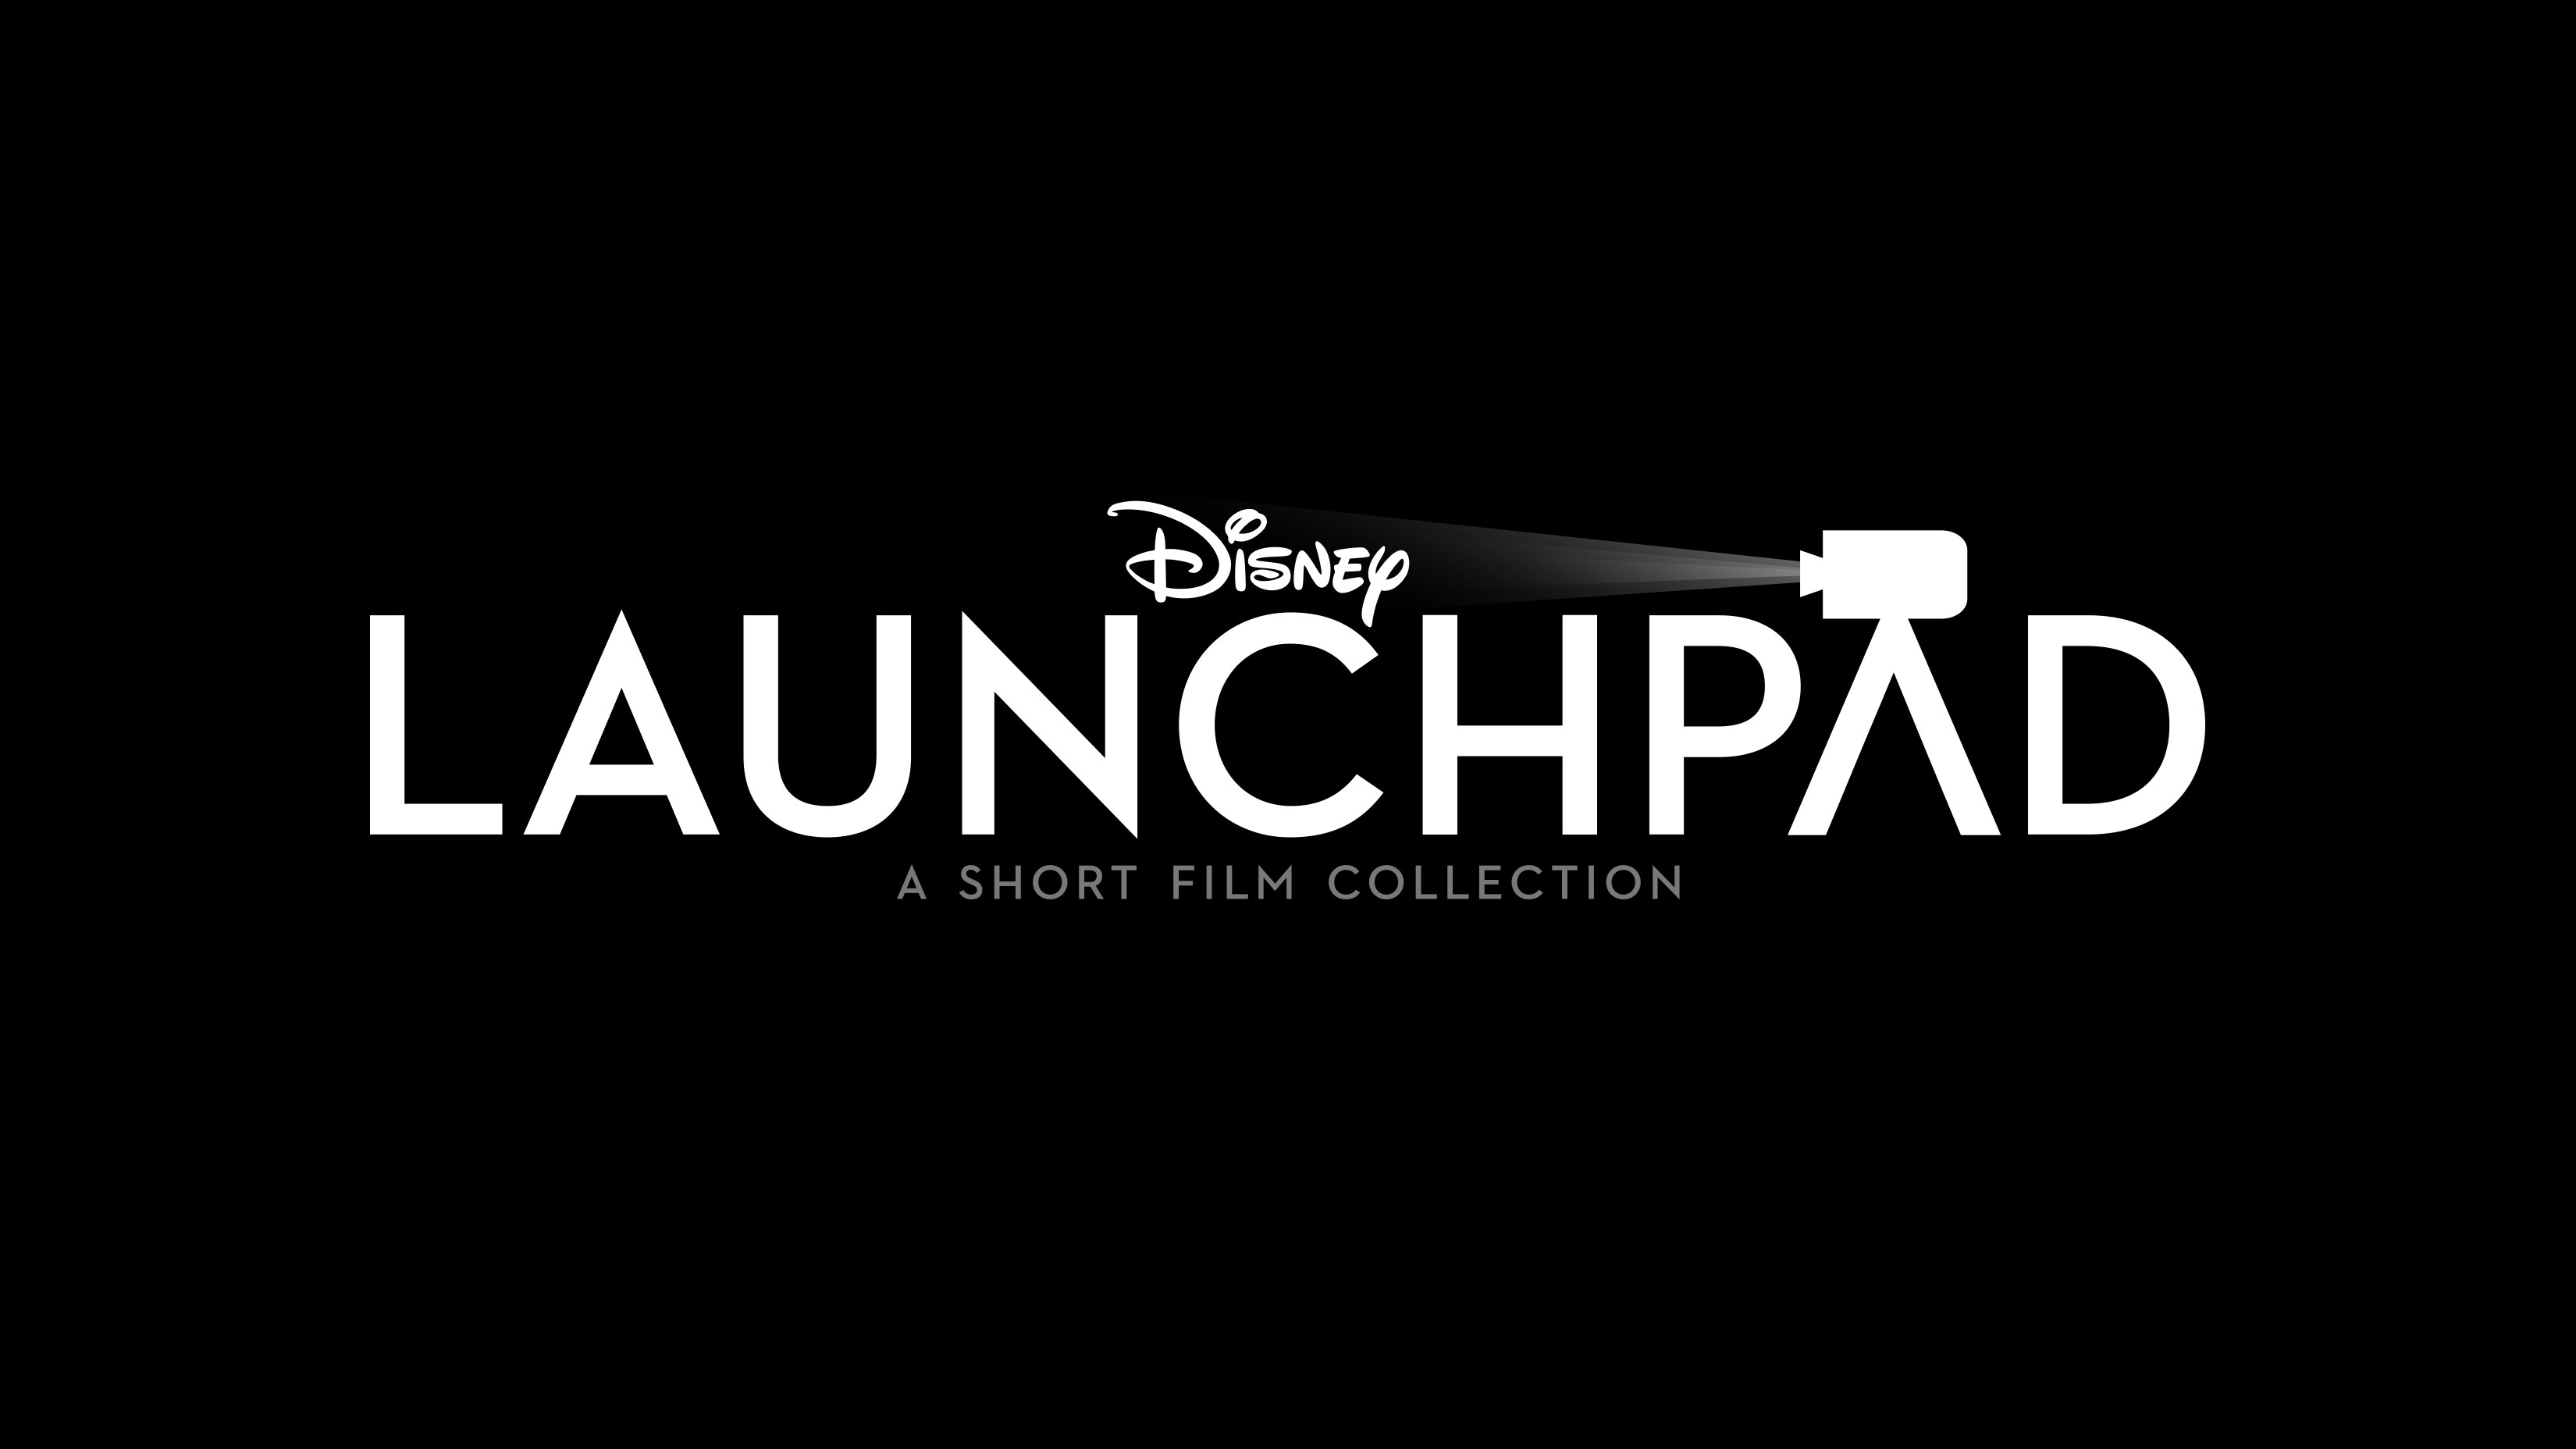 Disney+ Announces Second Season Of “Launchpad”: A Collection Of Short Films From A New Generation Of Directors And Writers From Underrepresented Backgrounds